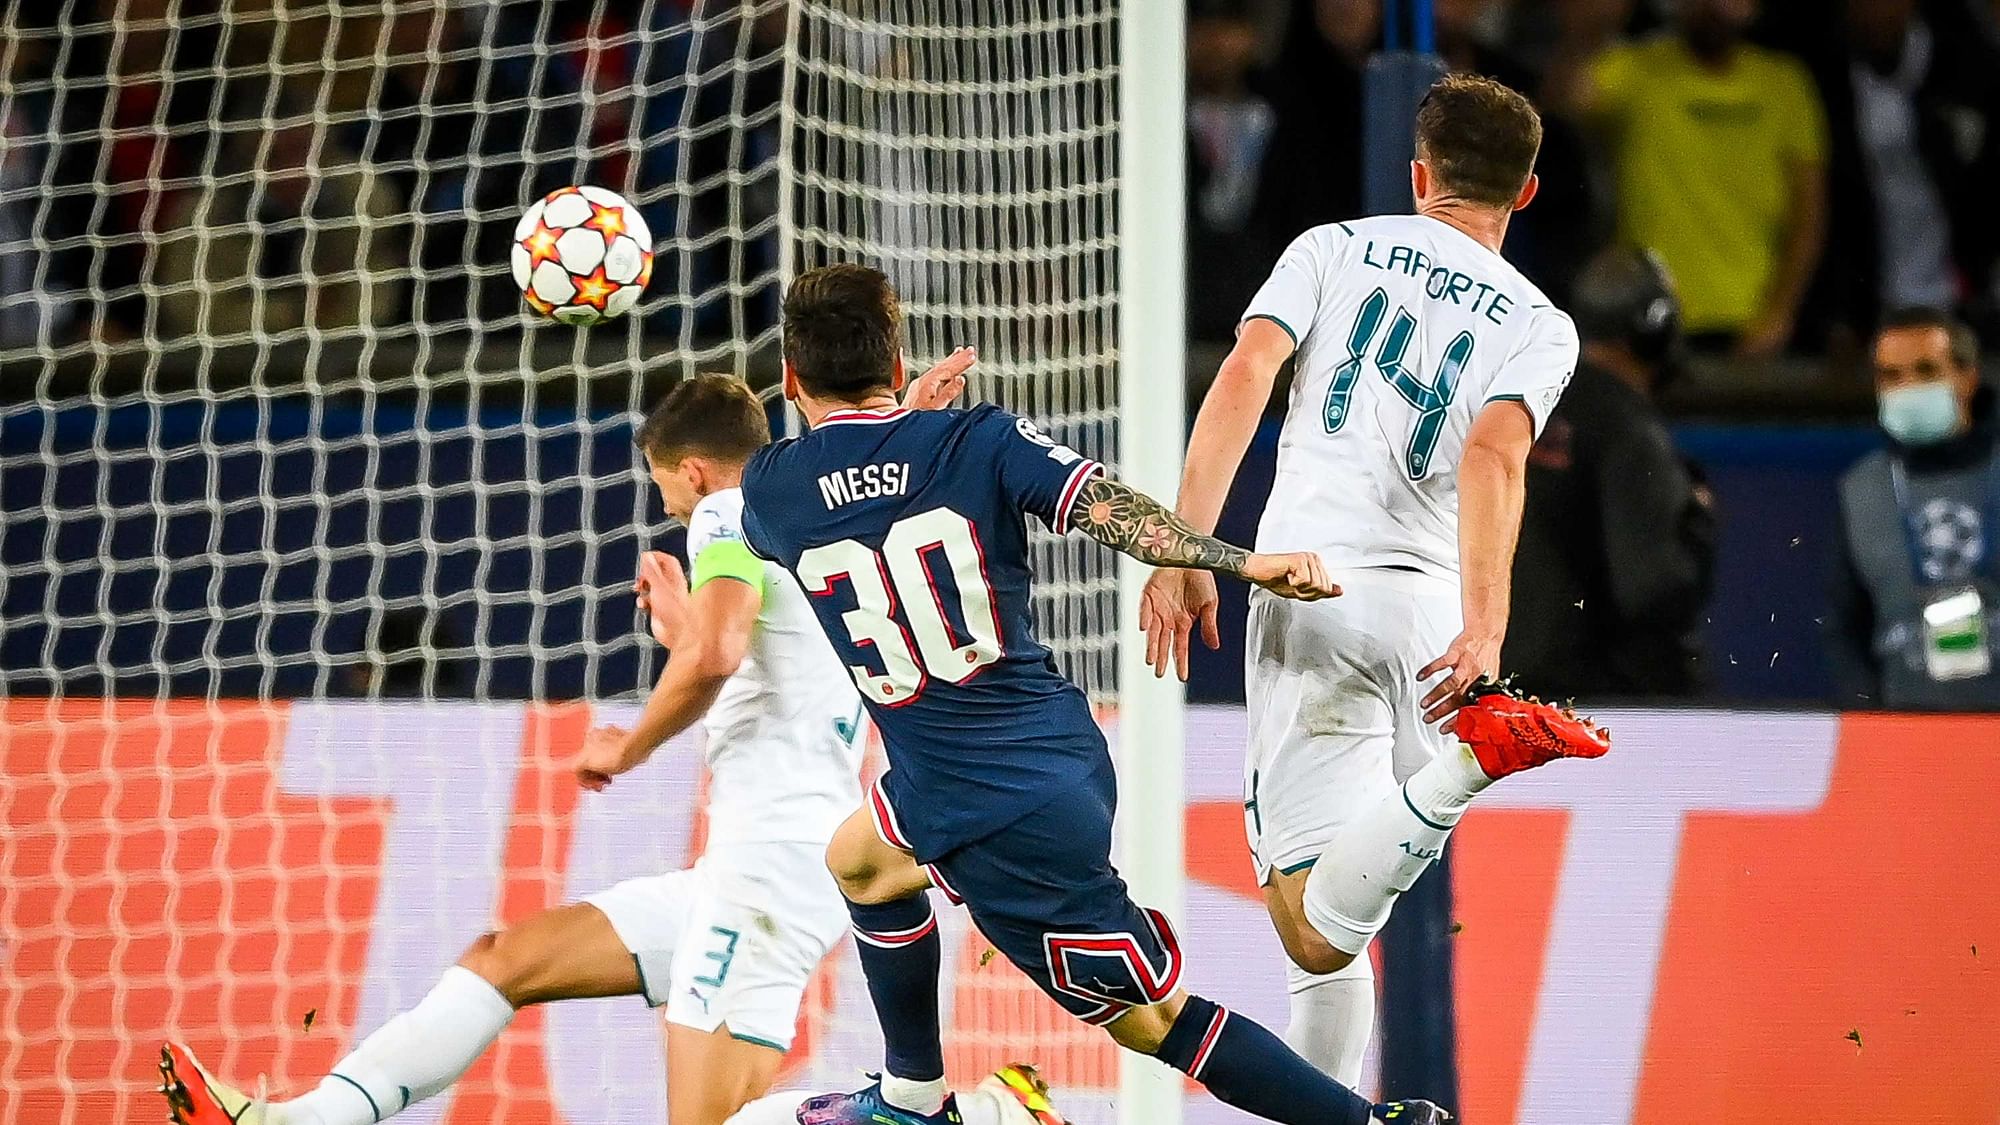 Watch: Lionel Messi Scores His First PSG Goal in Win Against Man City